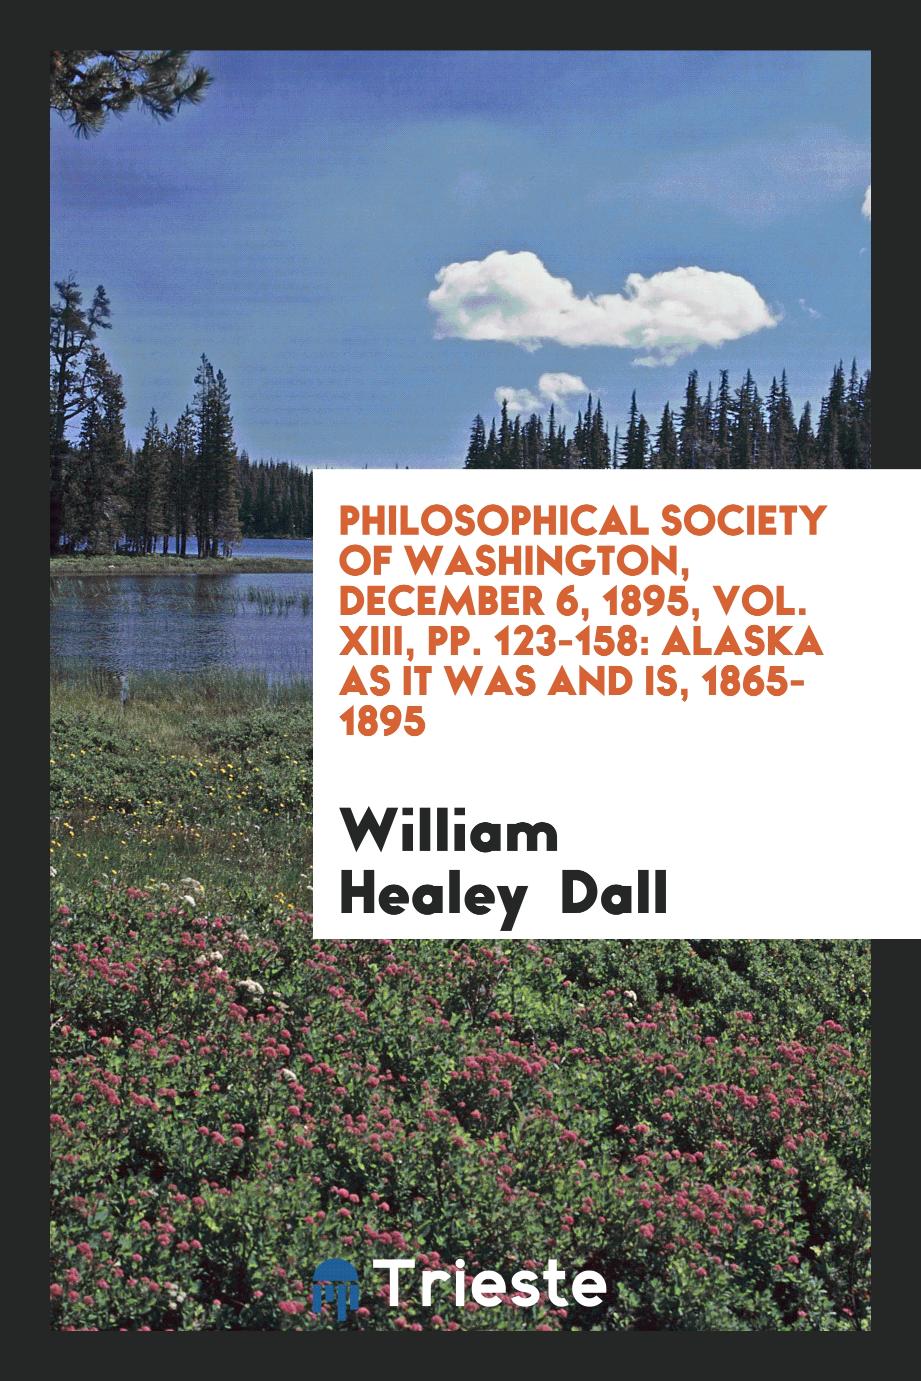 Philosophical society of Washington, December 6, 1895, Vol. XIII, pp. 123-158: Alaska as it was and is, 1865-1895